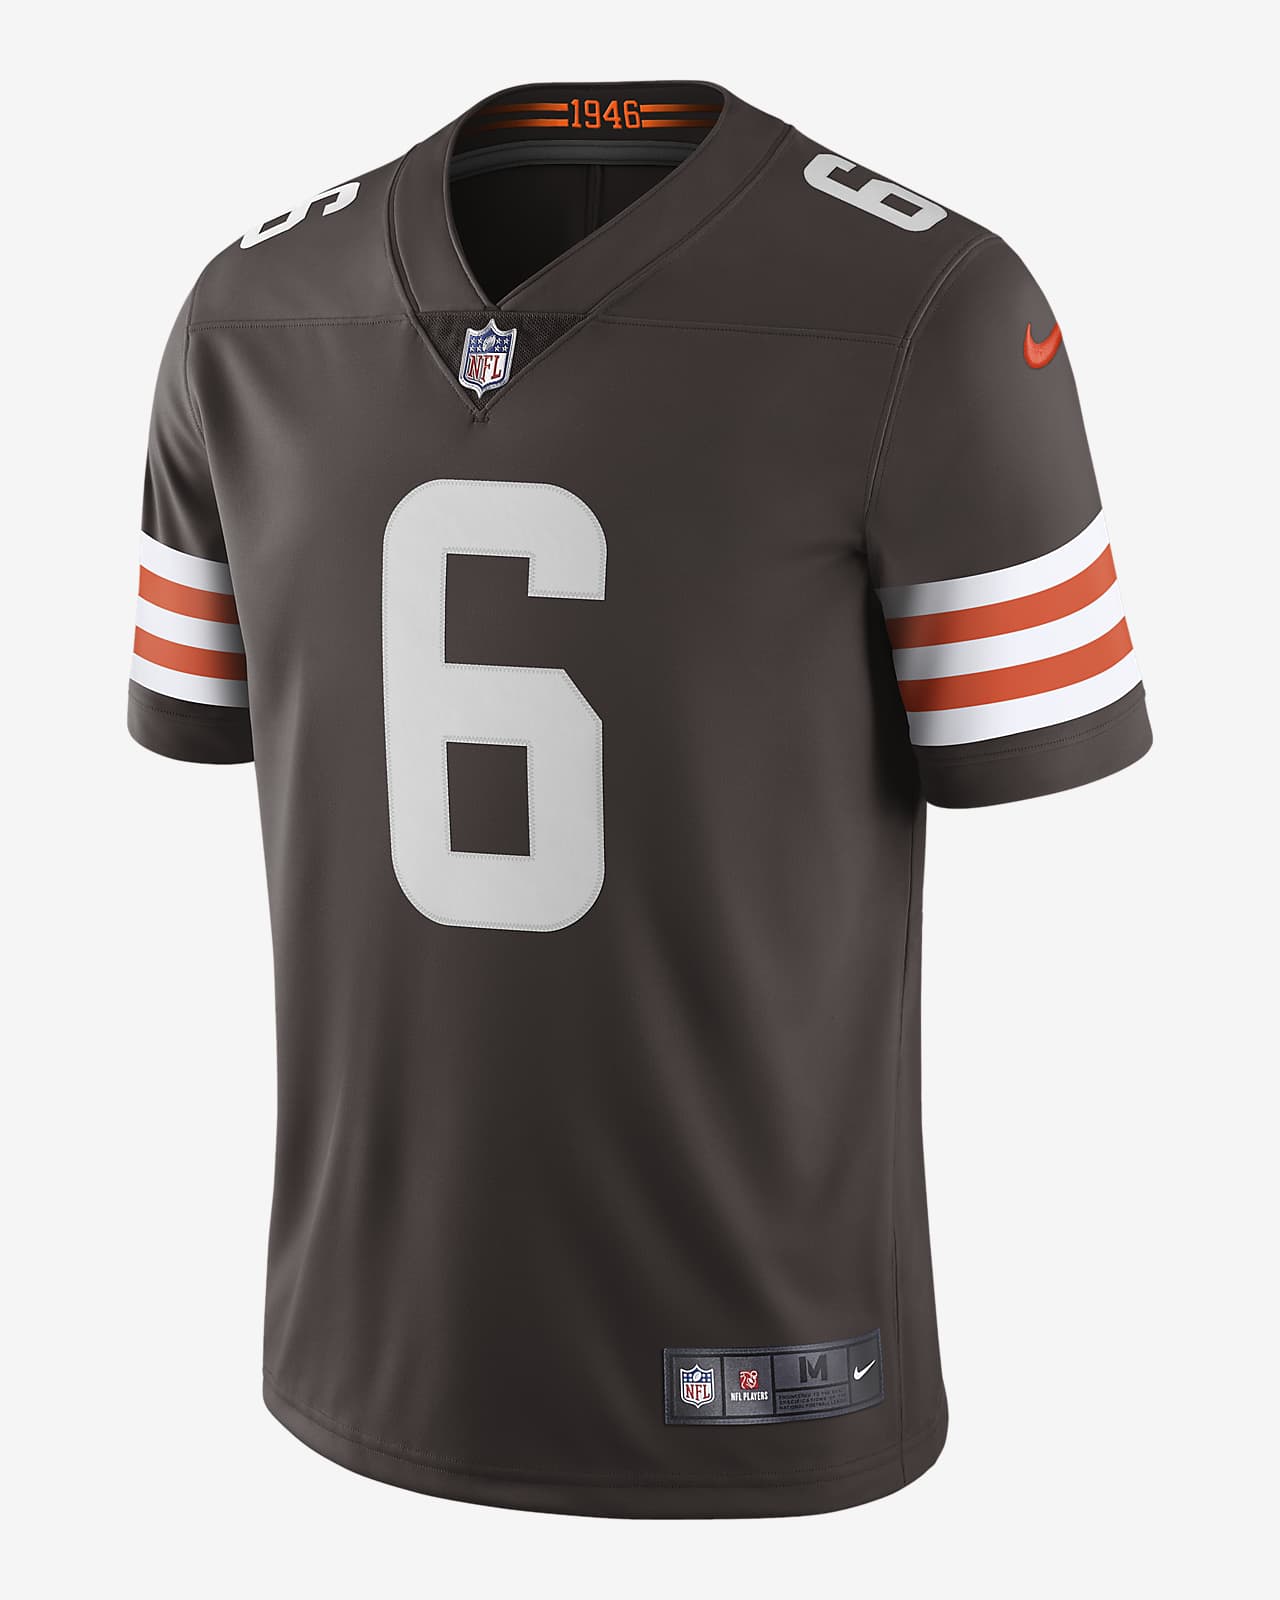 cleveland browns home jersey